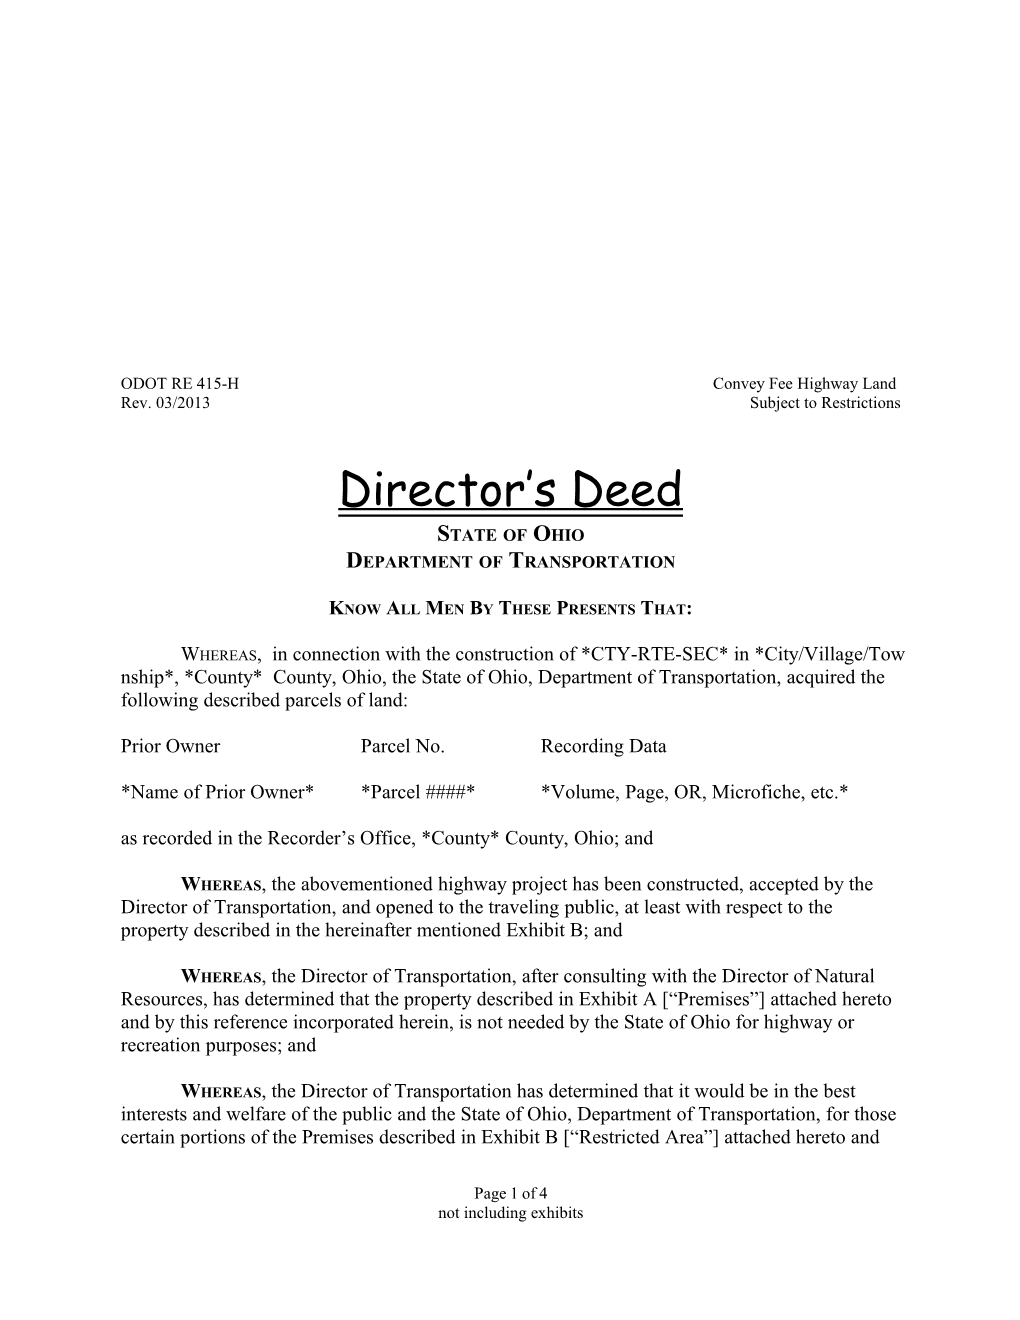 RE 415-H Director's Deed - Convey Fee of Highway Land Subject to Restrictions W Title VI